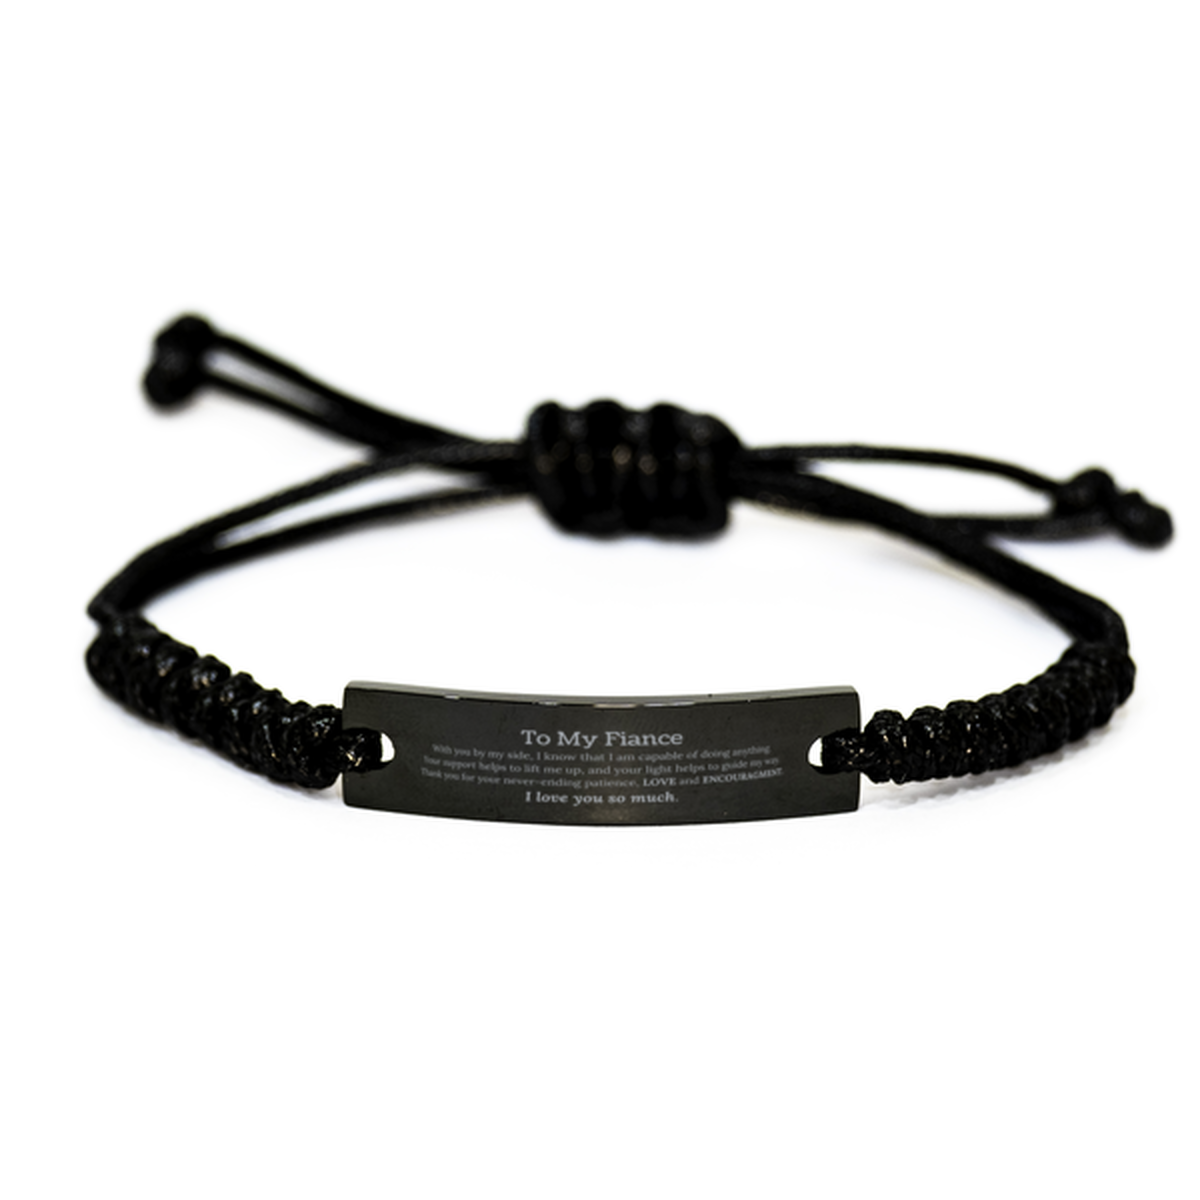 Appreciation Fiance Black Rope Bracelet Gifts, To My Fiance Birthday Christmas Wedding Keepsake Gifts for Fiance With you by my side, I know that I am capable of doing anything. I love you so much